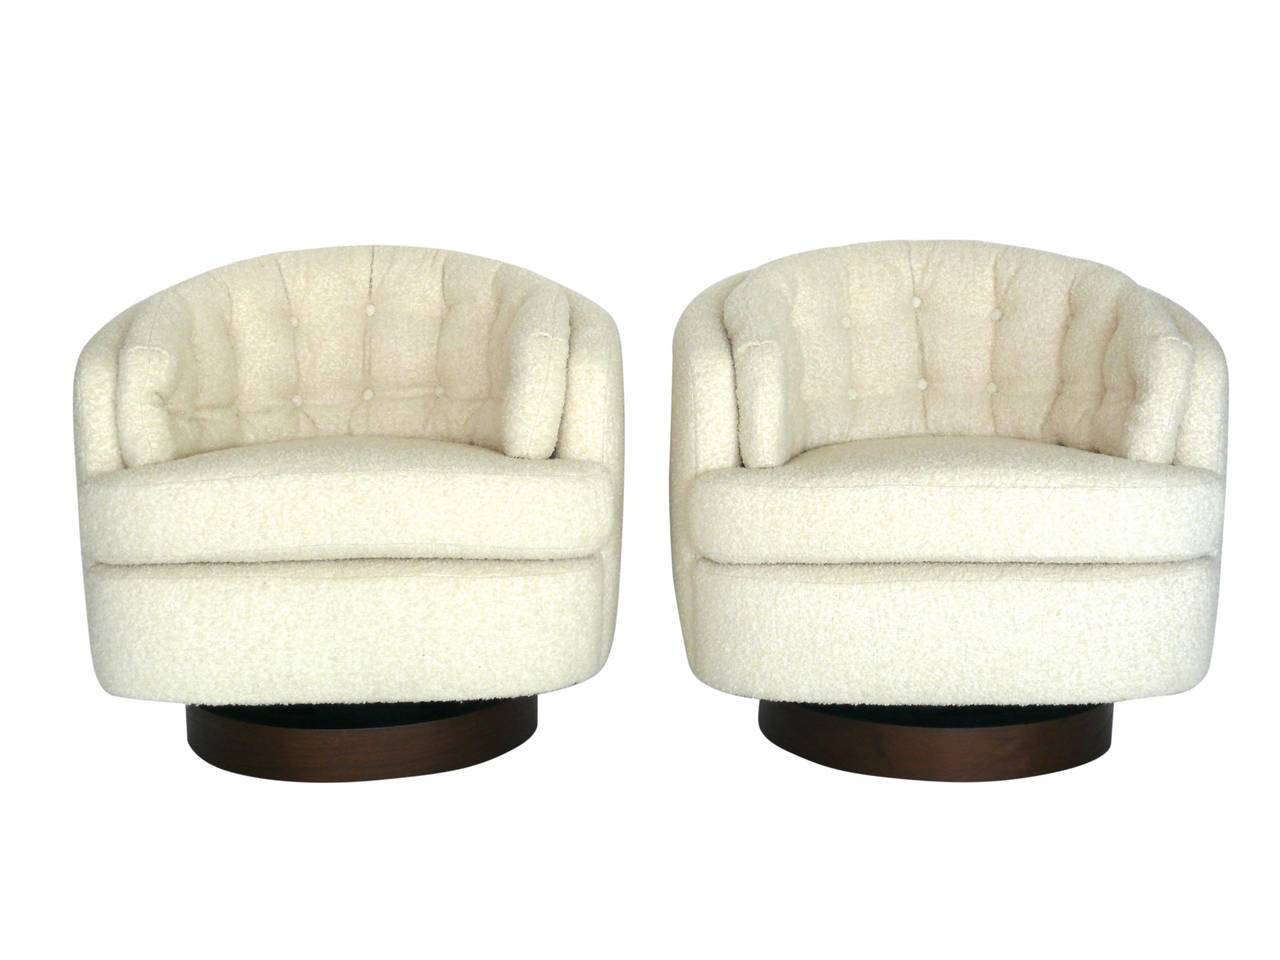 Classic pair of vintage swivel chairs by Milo Baughman for Directional. Round tub chairs with tufted biscuit back cushion. Newly reupholstered in a wool bouclé fabric. Base has a swivel and tilt mechanism. Very rare. Perfect for the home or office.